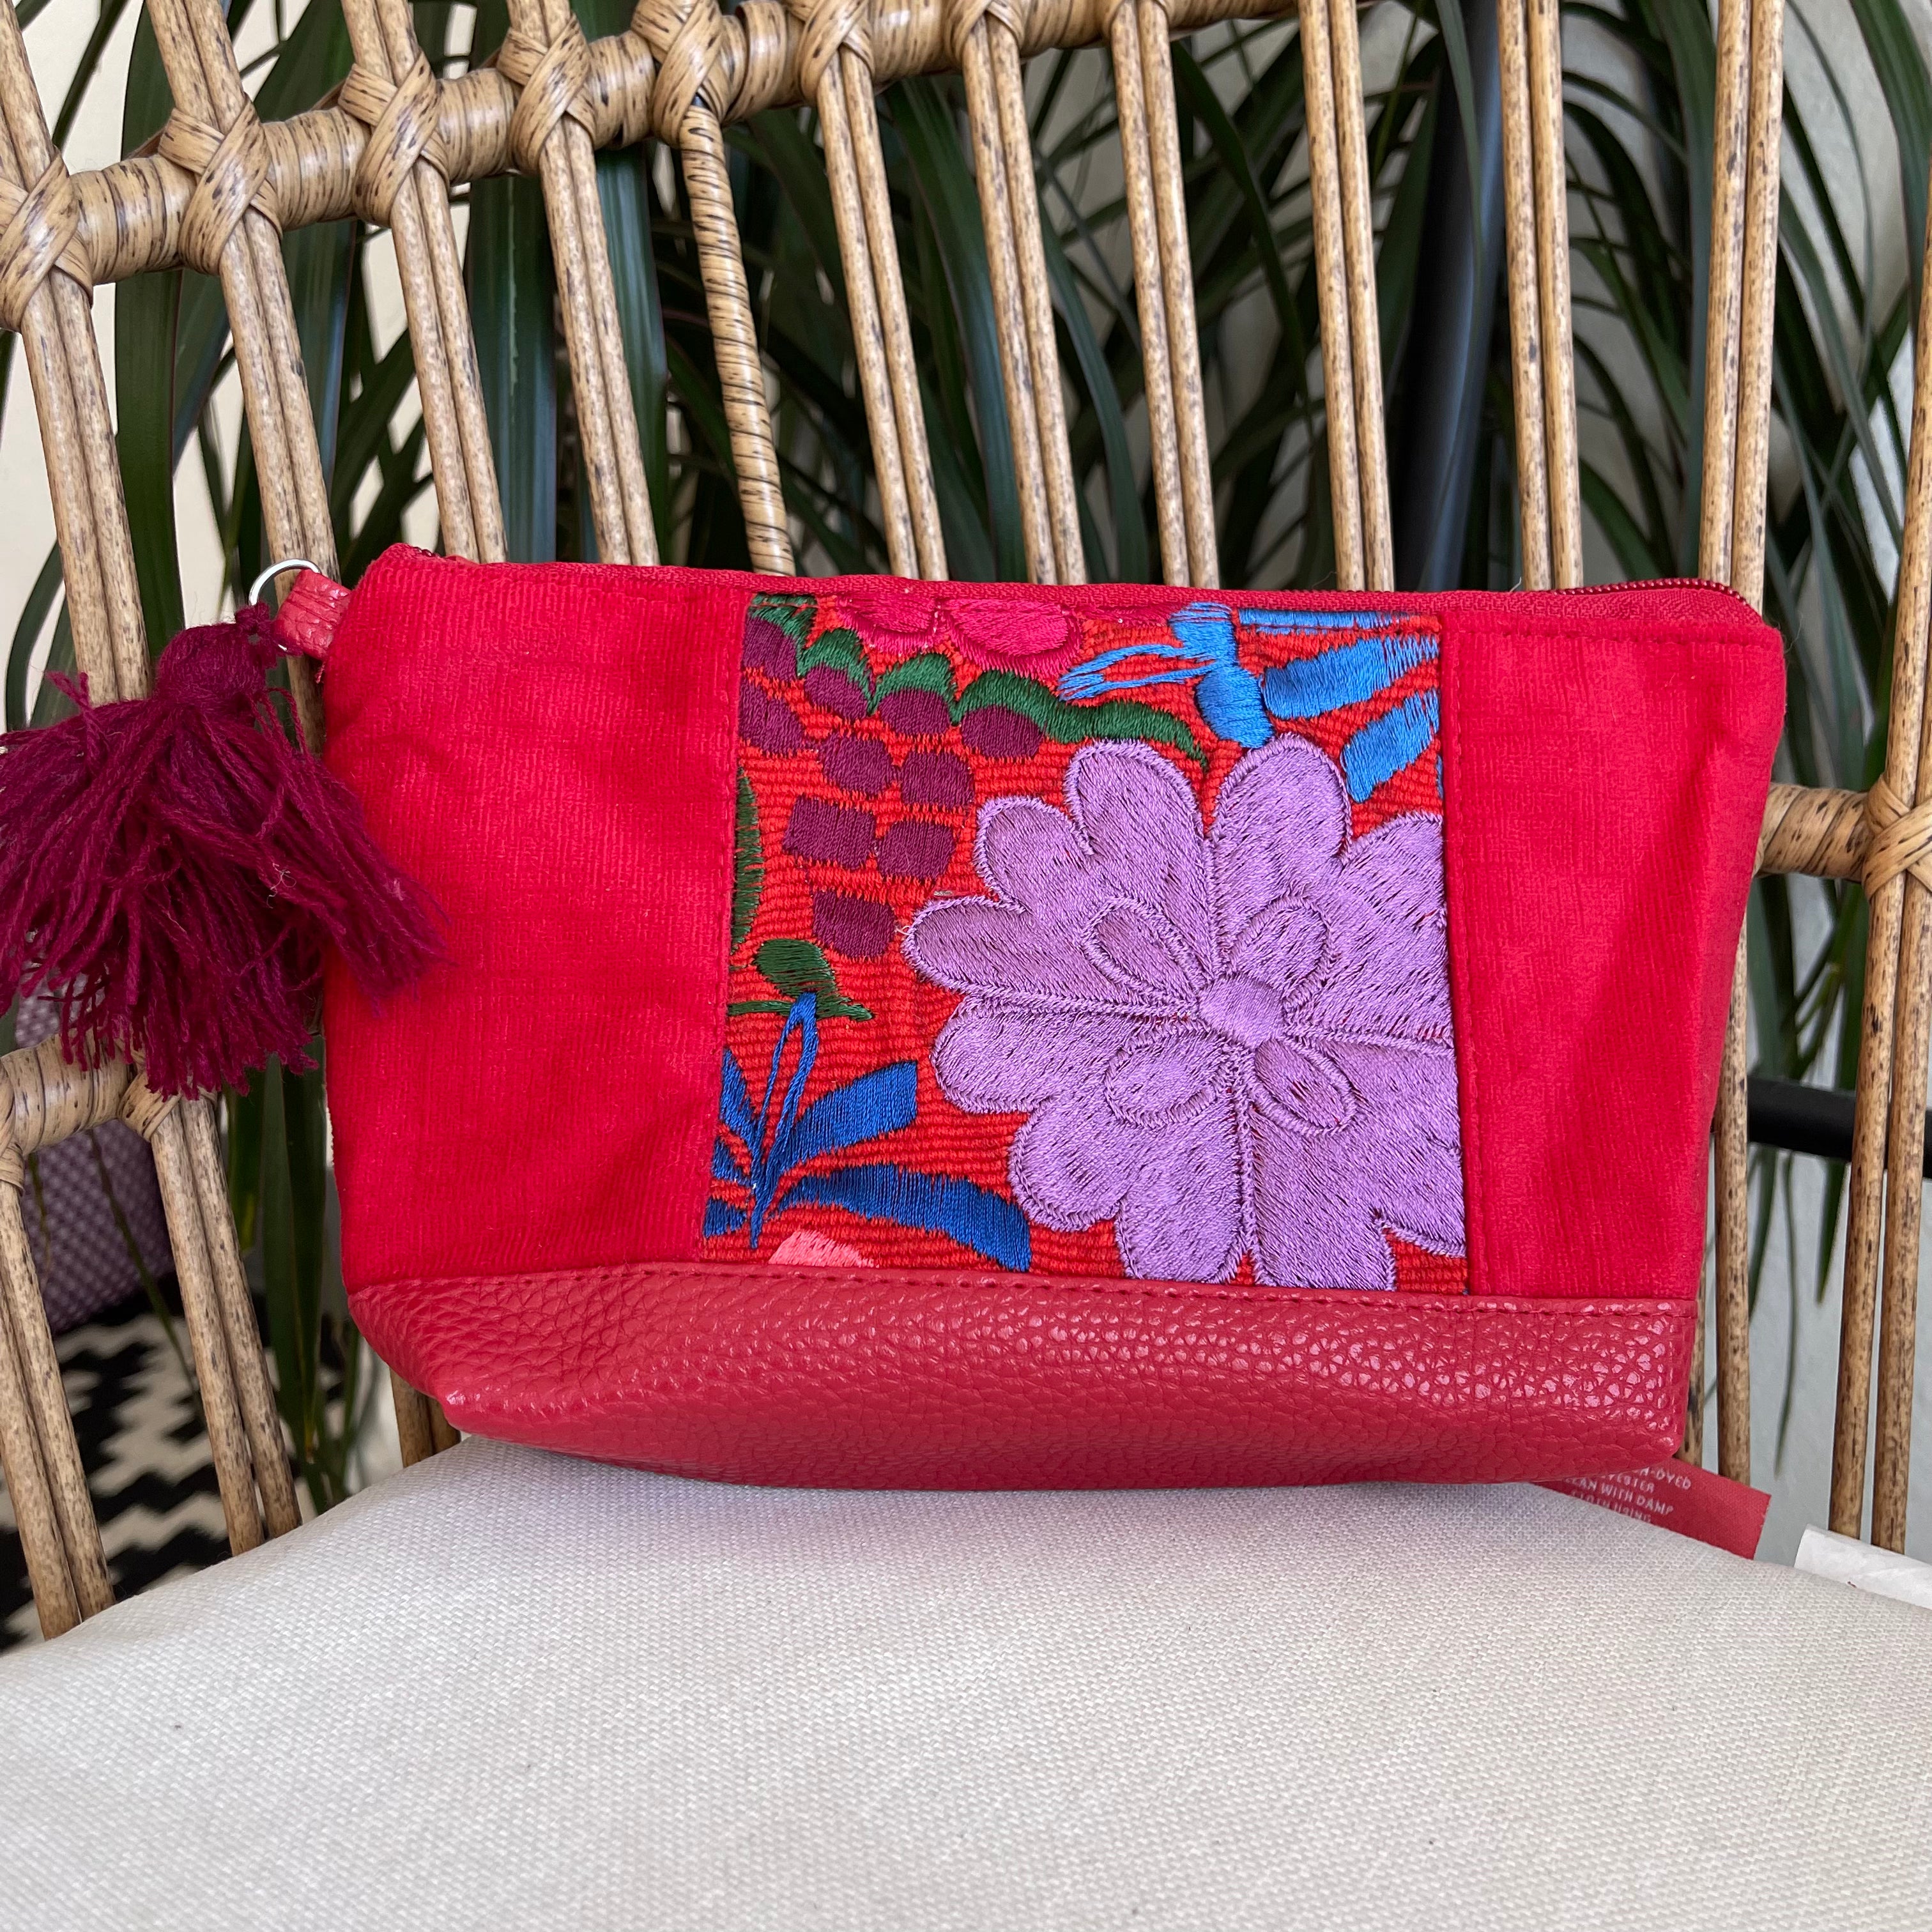 Embroidered Toiletry Bag